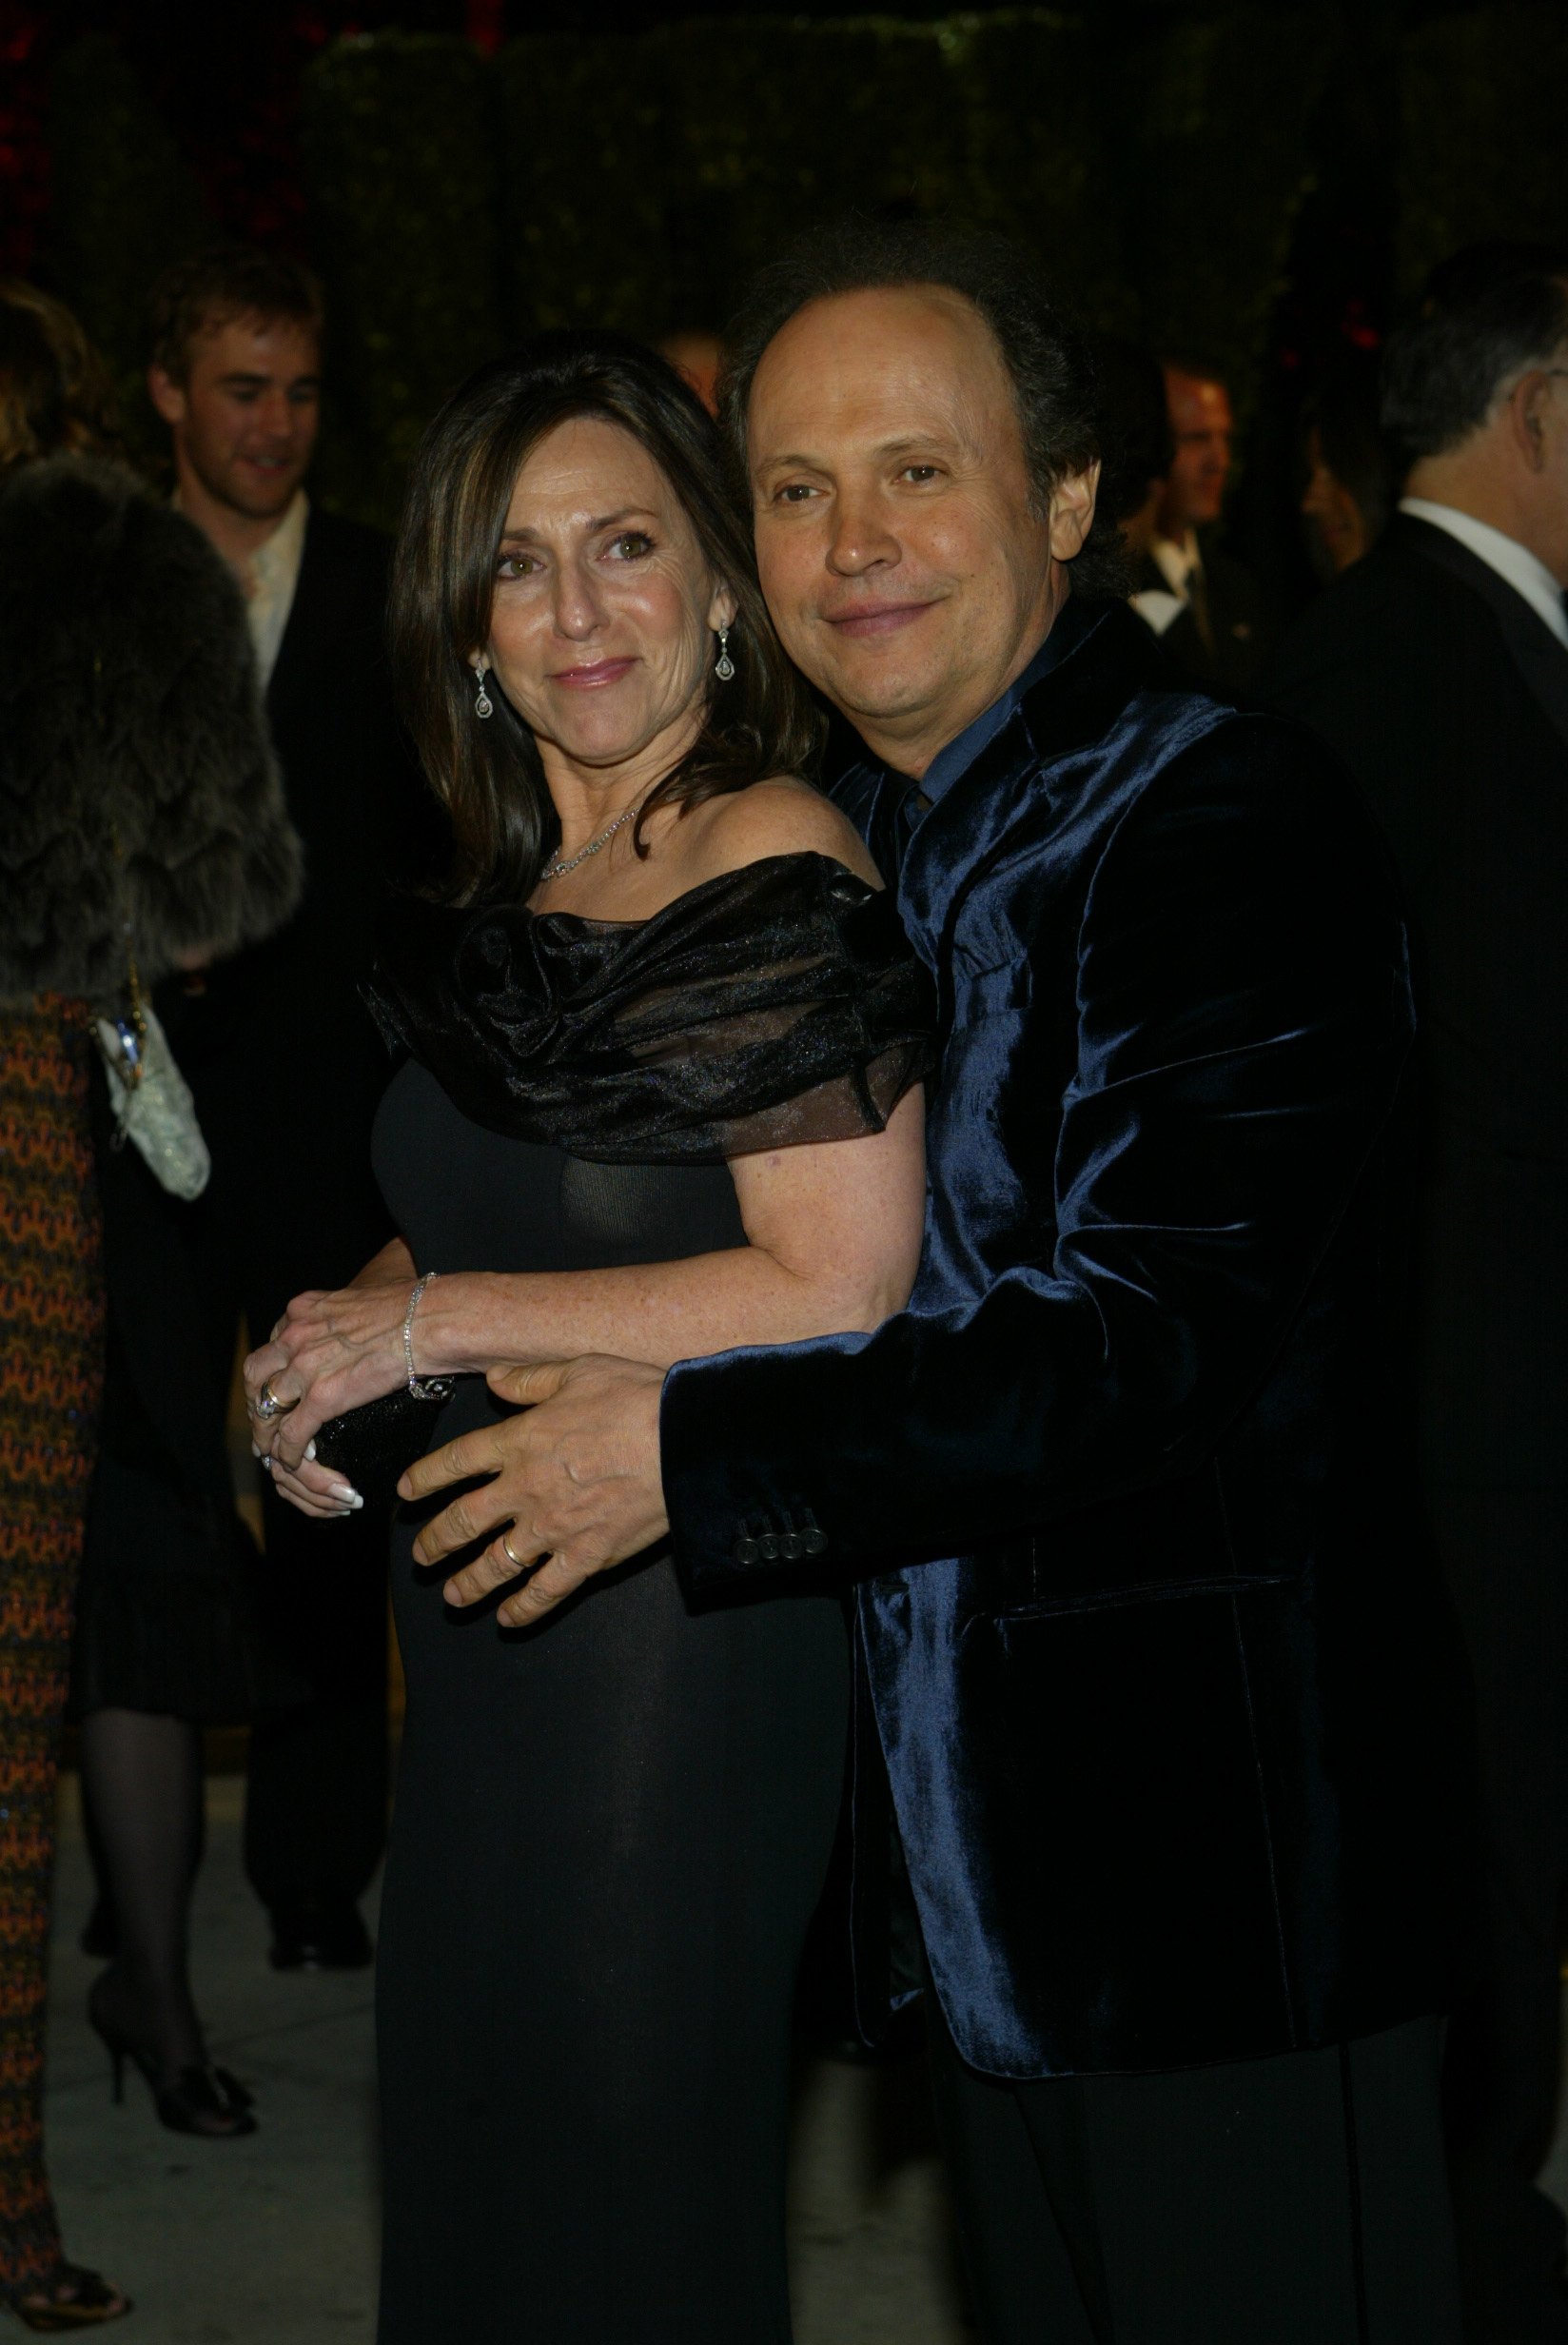 Billy and Janice Crystal at the Vanity Fair Academy Awards party in West Hollywood on March 1, 2004 | Source: Getty Images